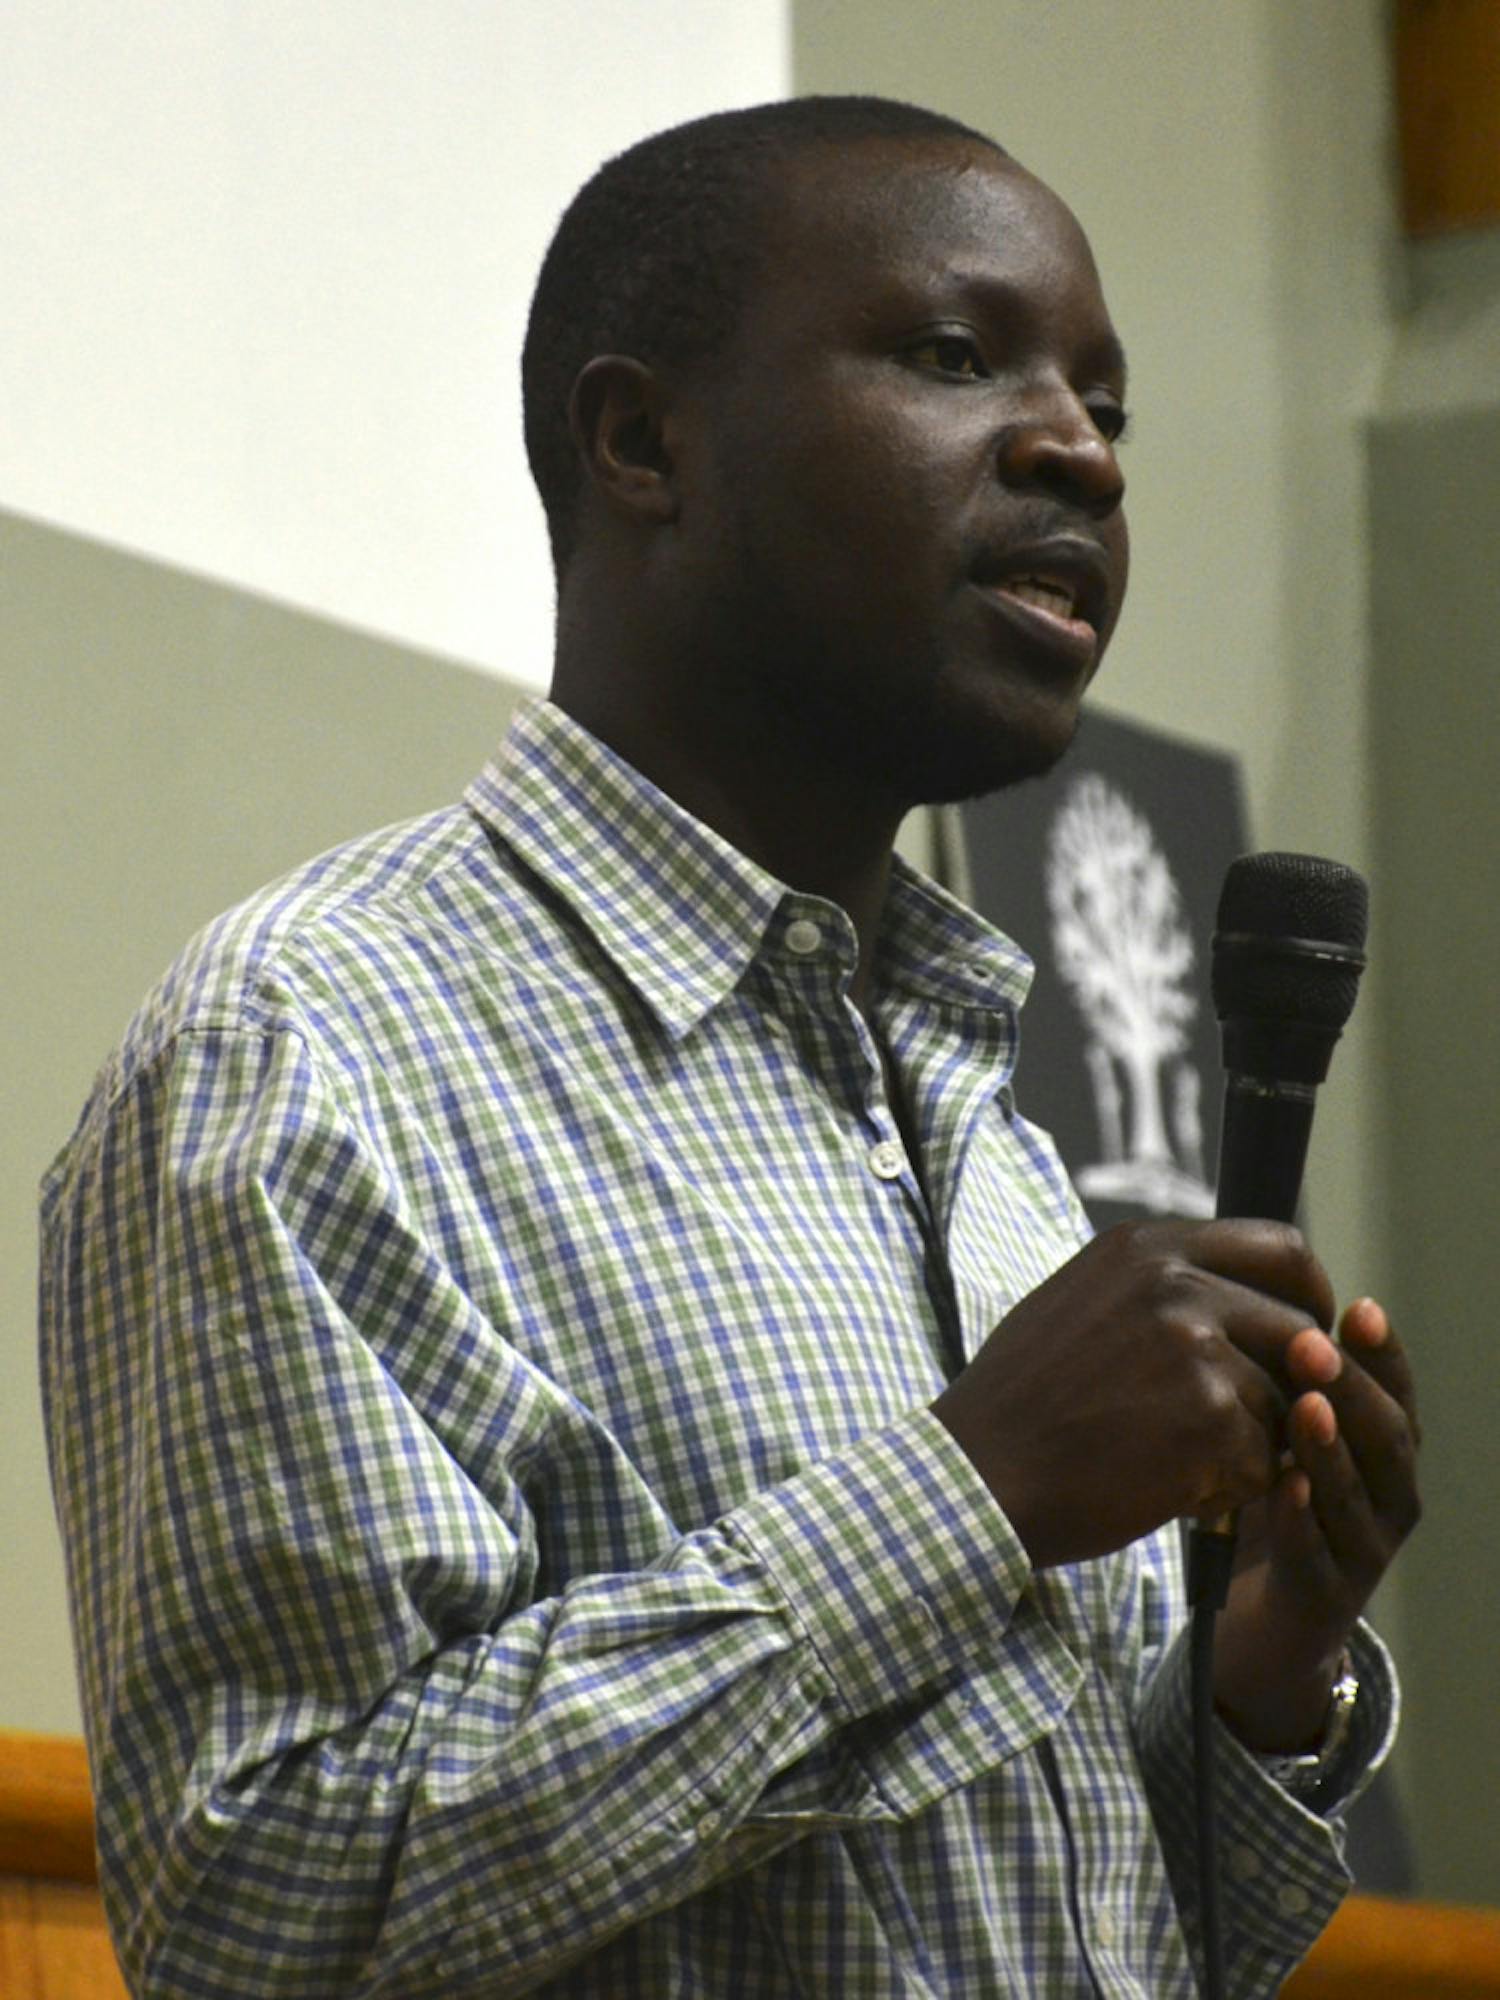 Twenty-nine-year-old author William Kamkwamba speaks at the Headquarters Library on Tuesday about his life in Malawi, Africa. At 14 years old, Kamkwamba built a windmill from scraps, providing electricity for his village.